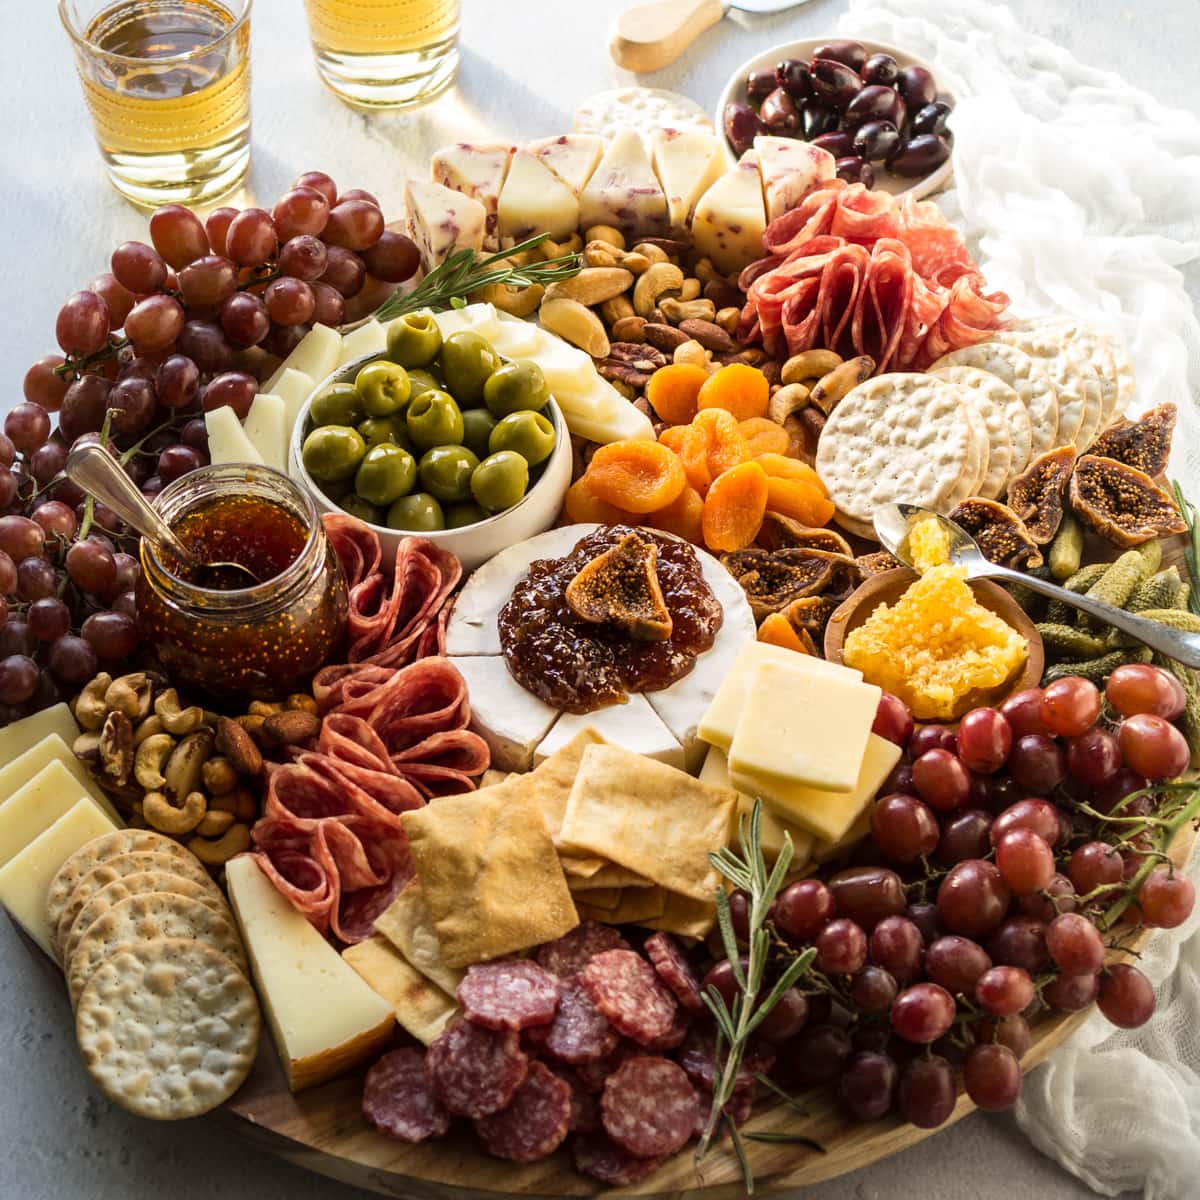 How to Make an Epic Charcuterie and Cheese Board ~Sweet & Savory